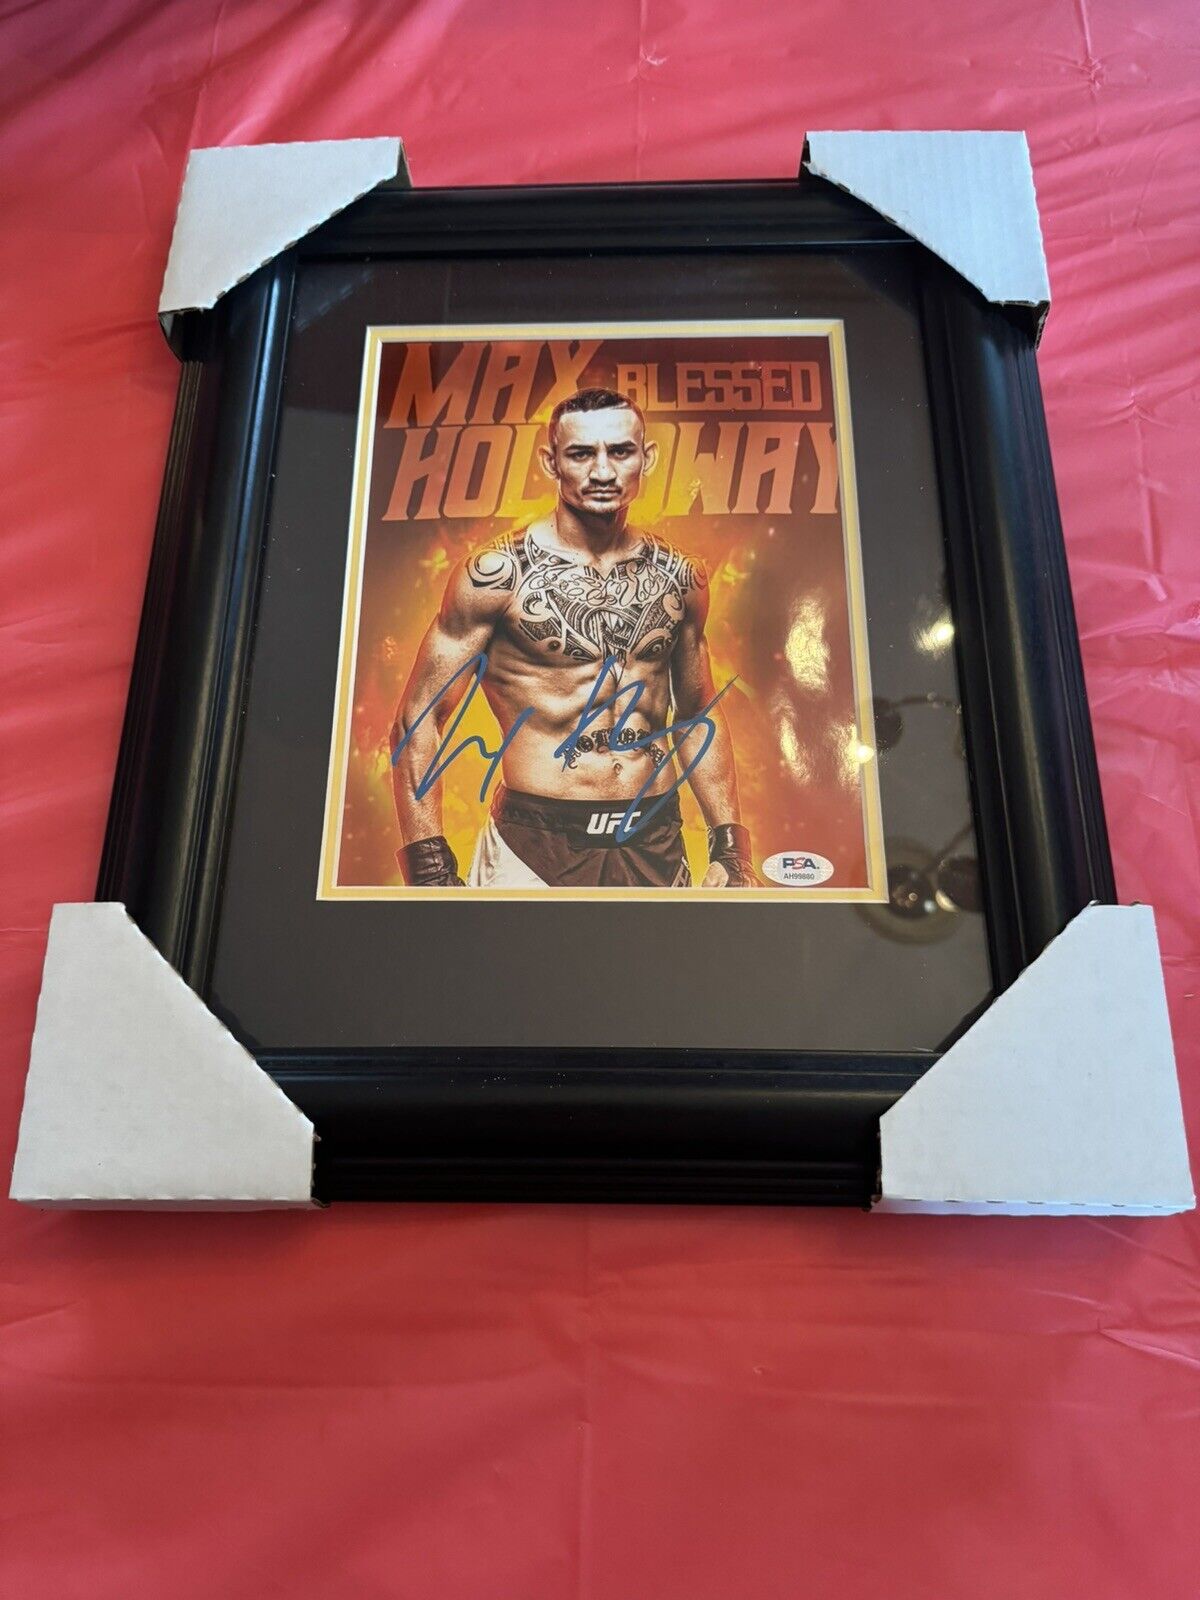 Max Holloway Blessed PSA Photo Framed